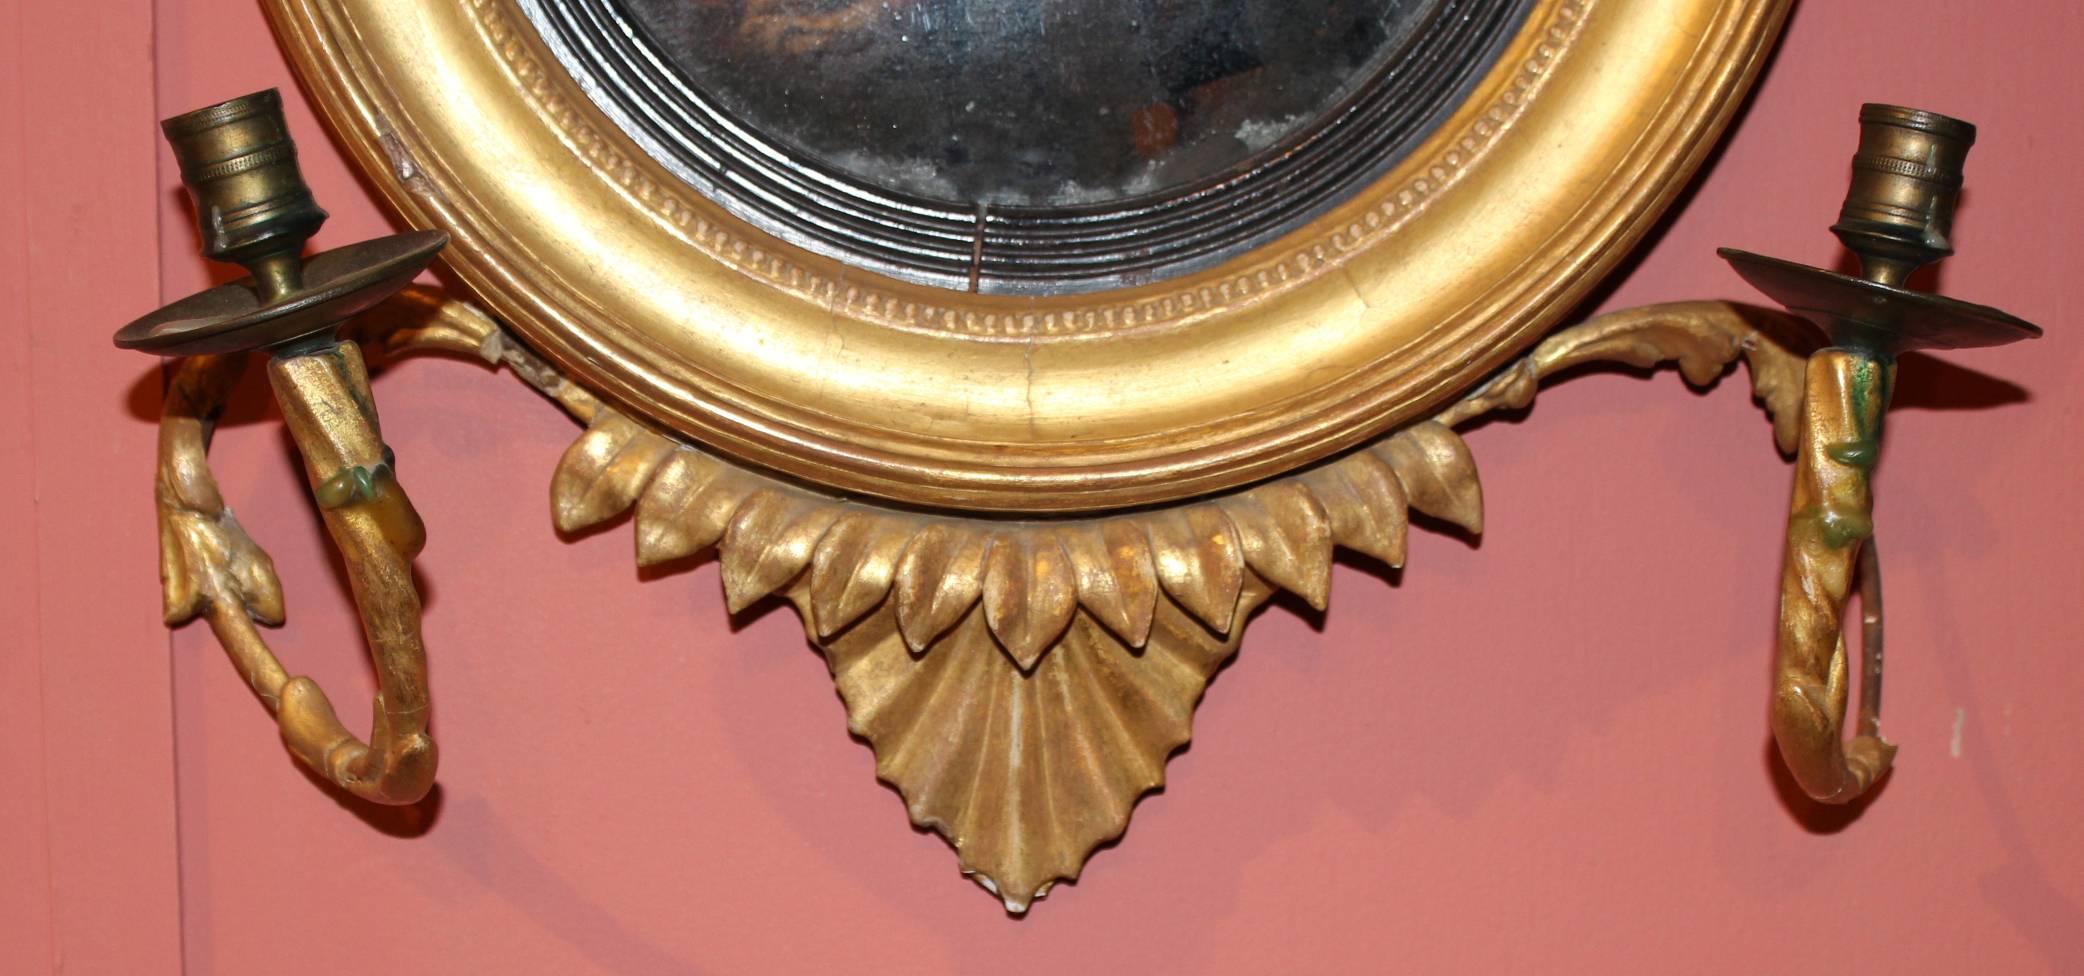 A rare example of a diminutive English giltwood girandole convex mirror with acanthus decoration and simple molded frame with ebonized reeded interior surrounding the original mirror plate. Scrolled wire and gesso candle arms with brass cups and